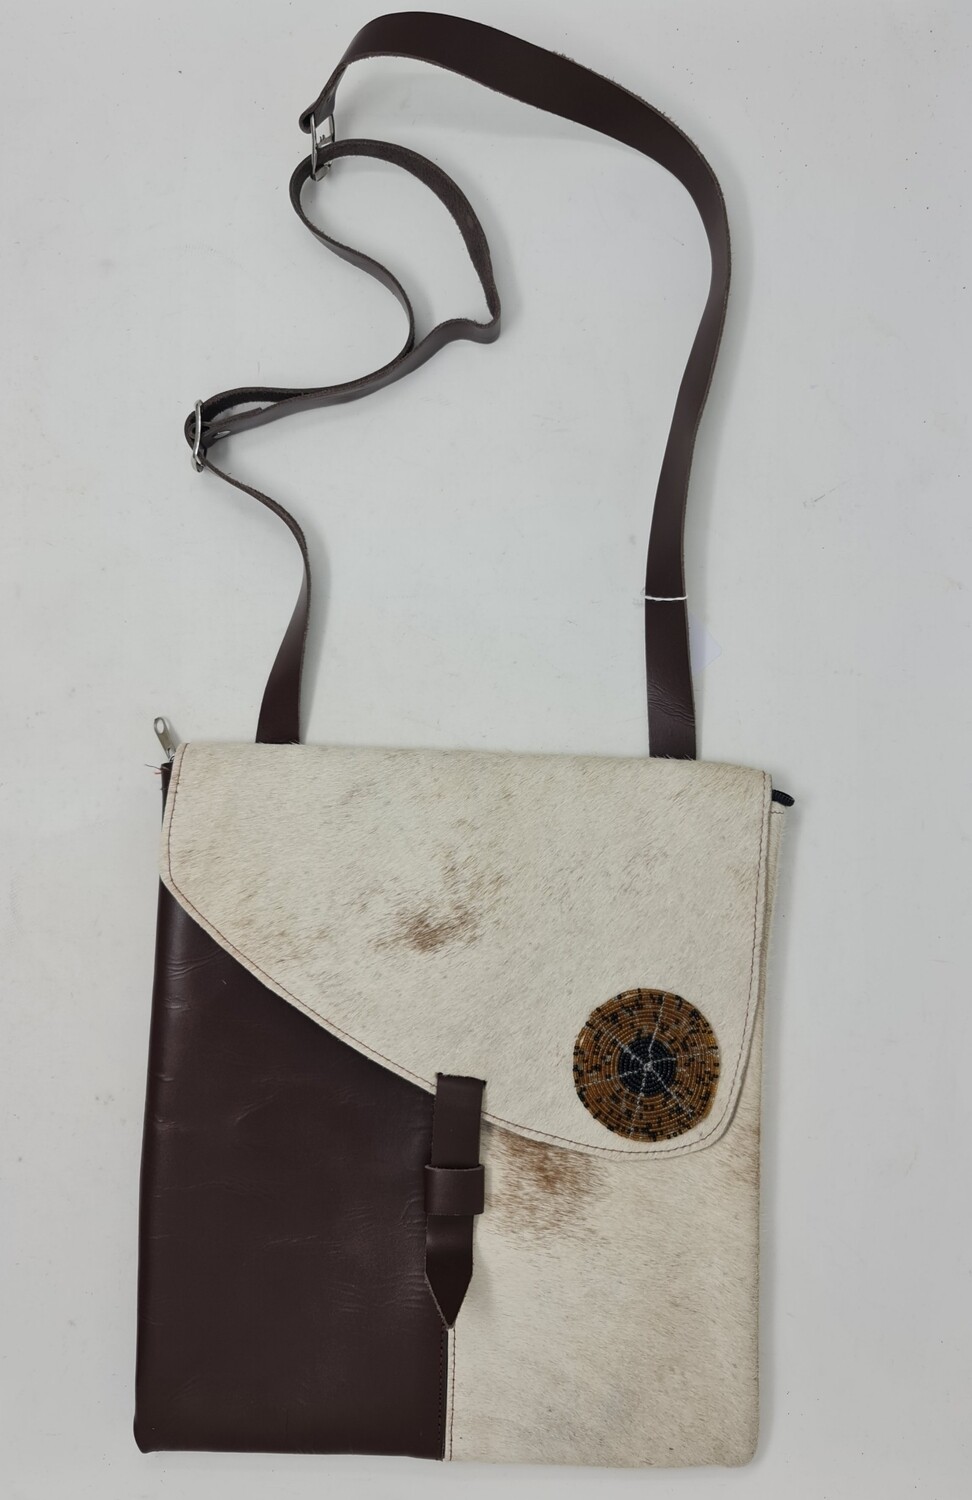 Handmade Cross-Body Laptop Bag - Leather and Gold Mix beads